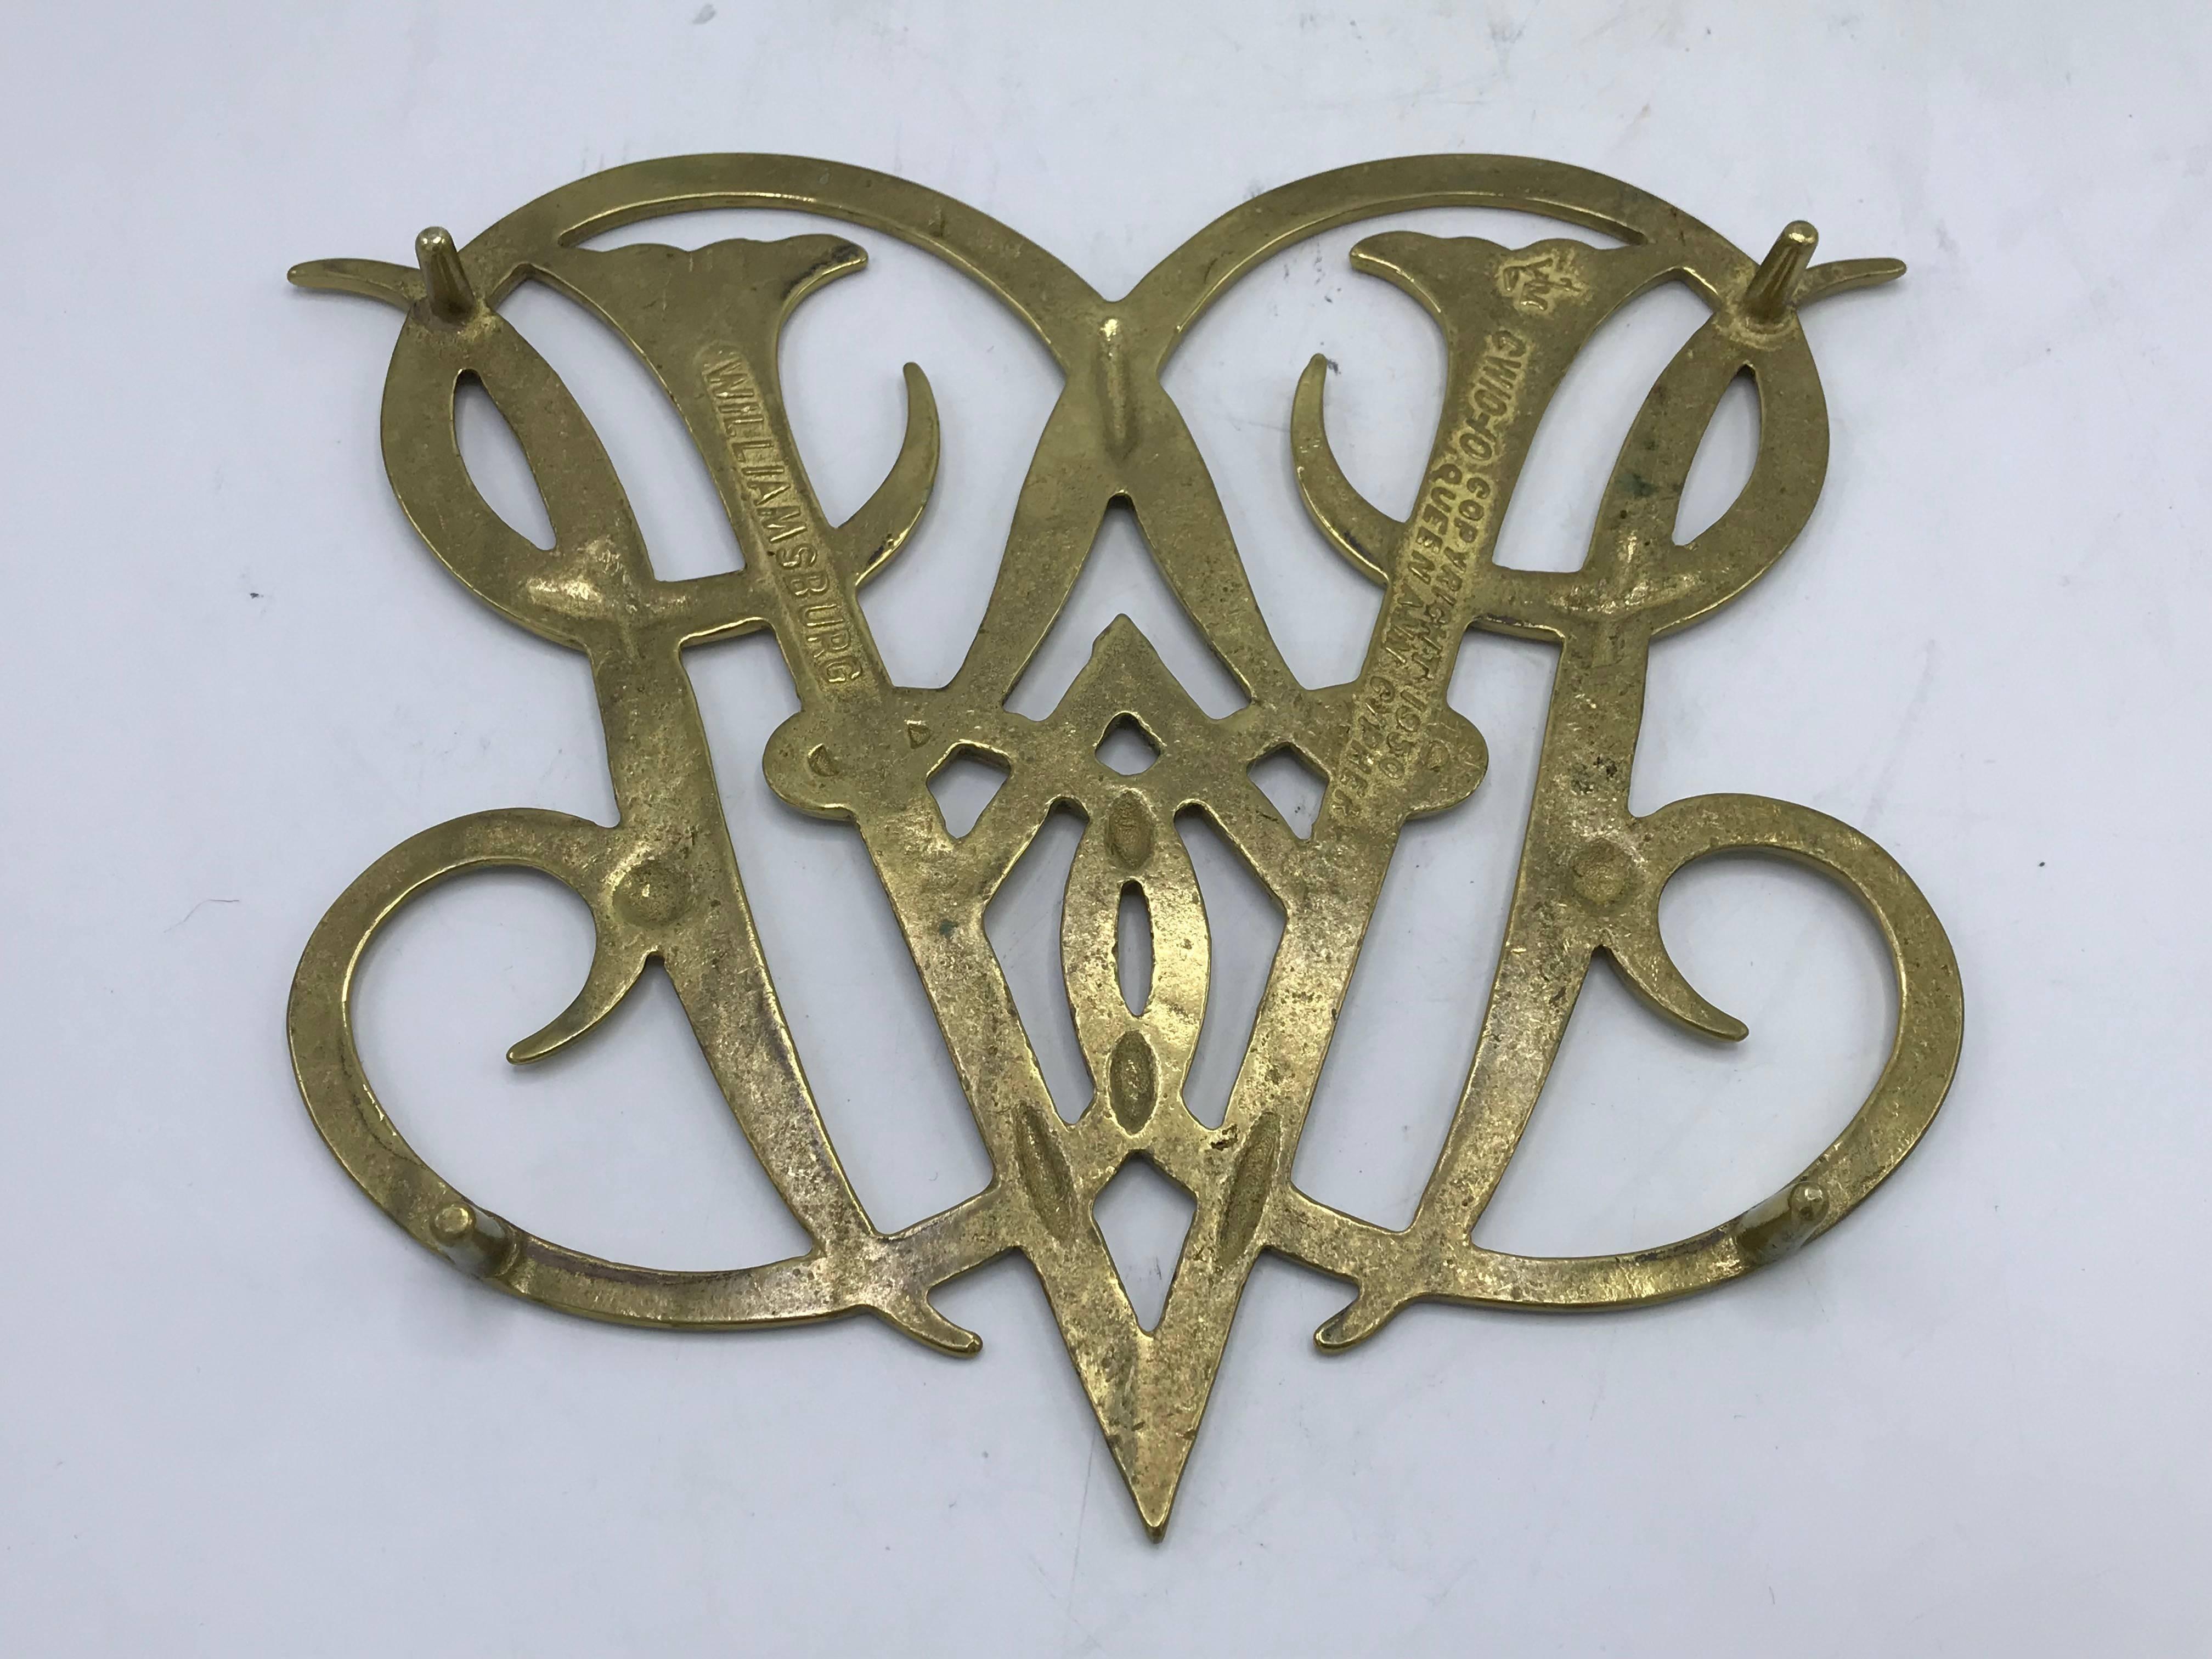 Brass Hot Plate Metalcrafters Brass Cypher Trivet William and Mary Williamsburg Brass Typography Virginia Calligraphy Metal Trivet